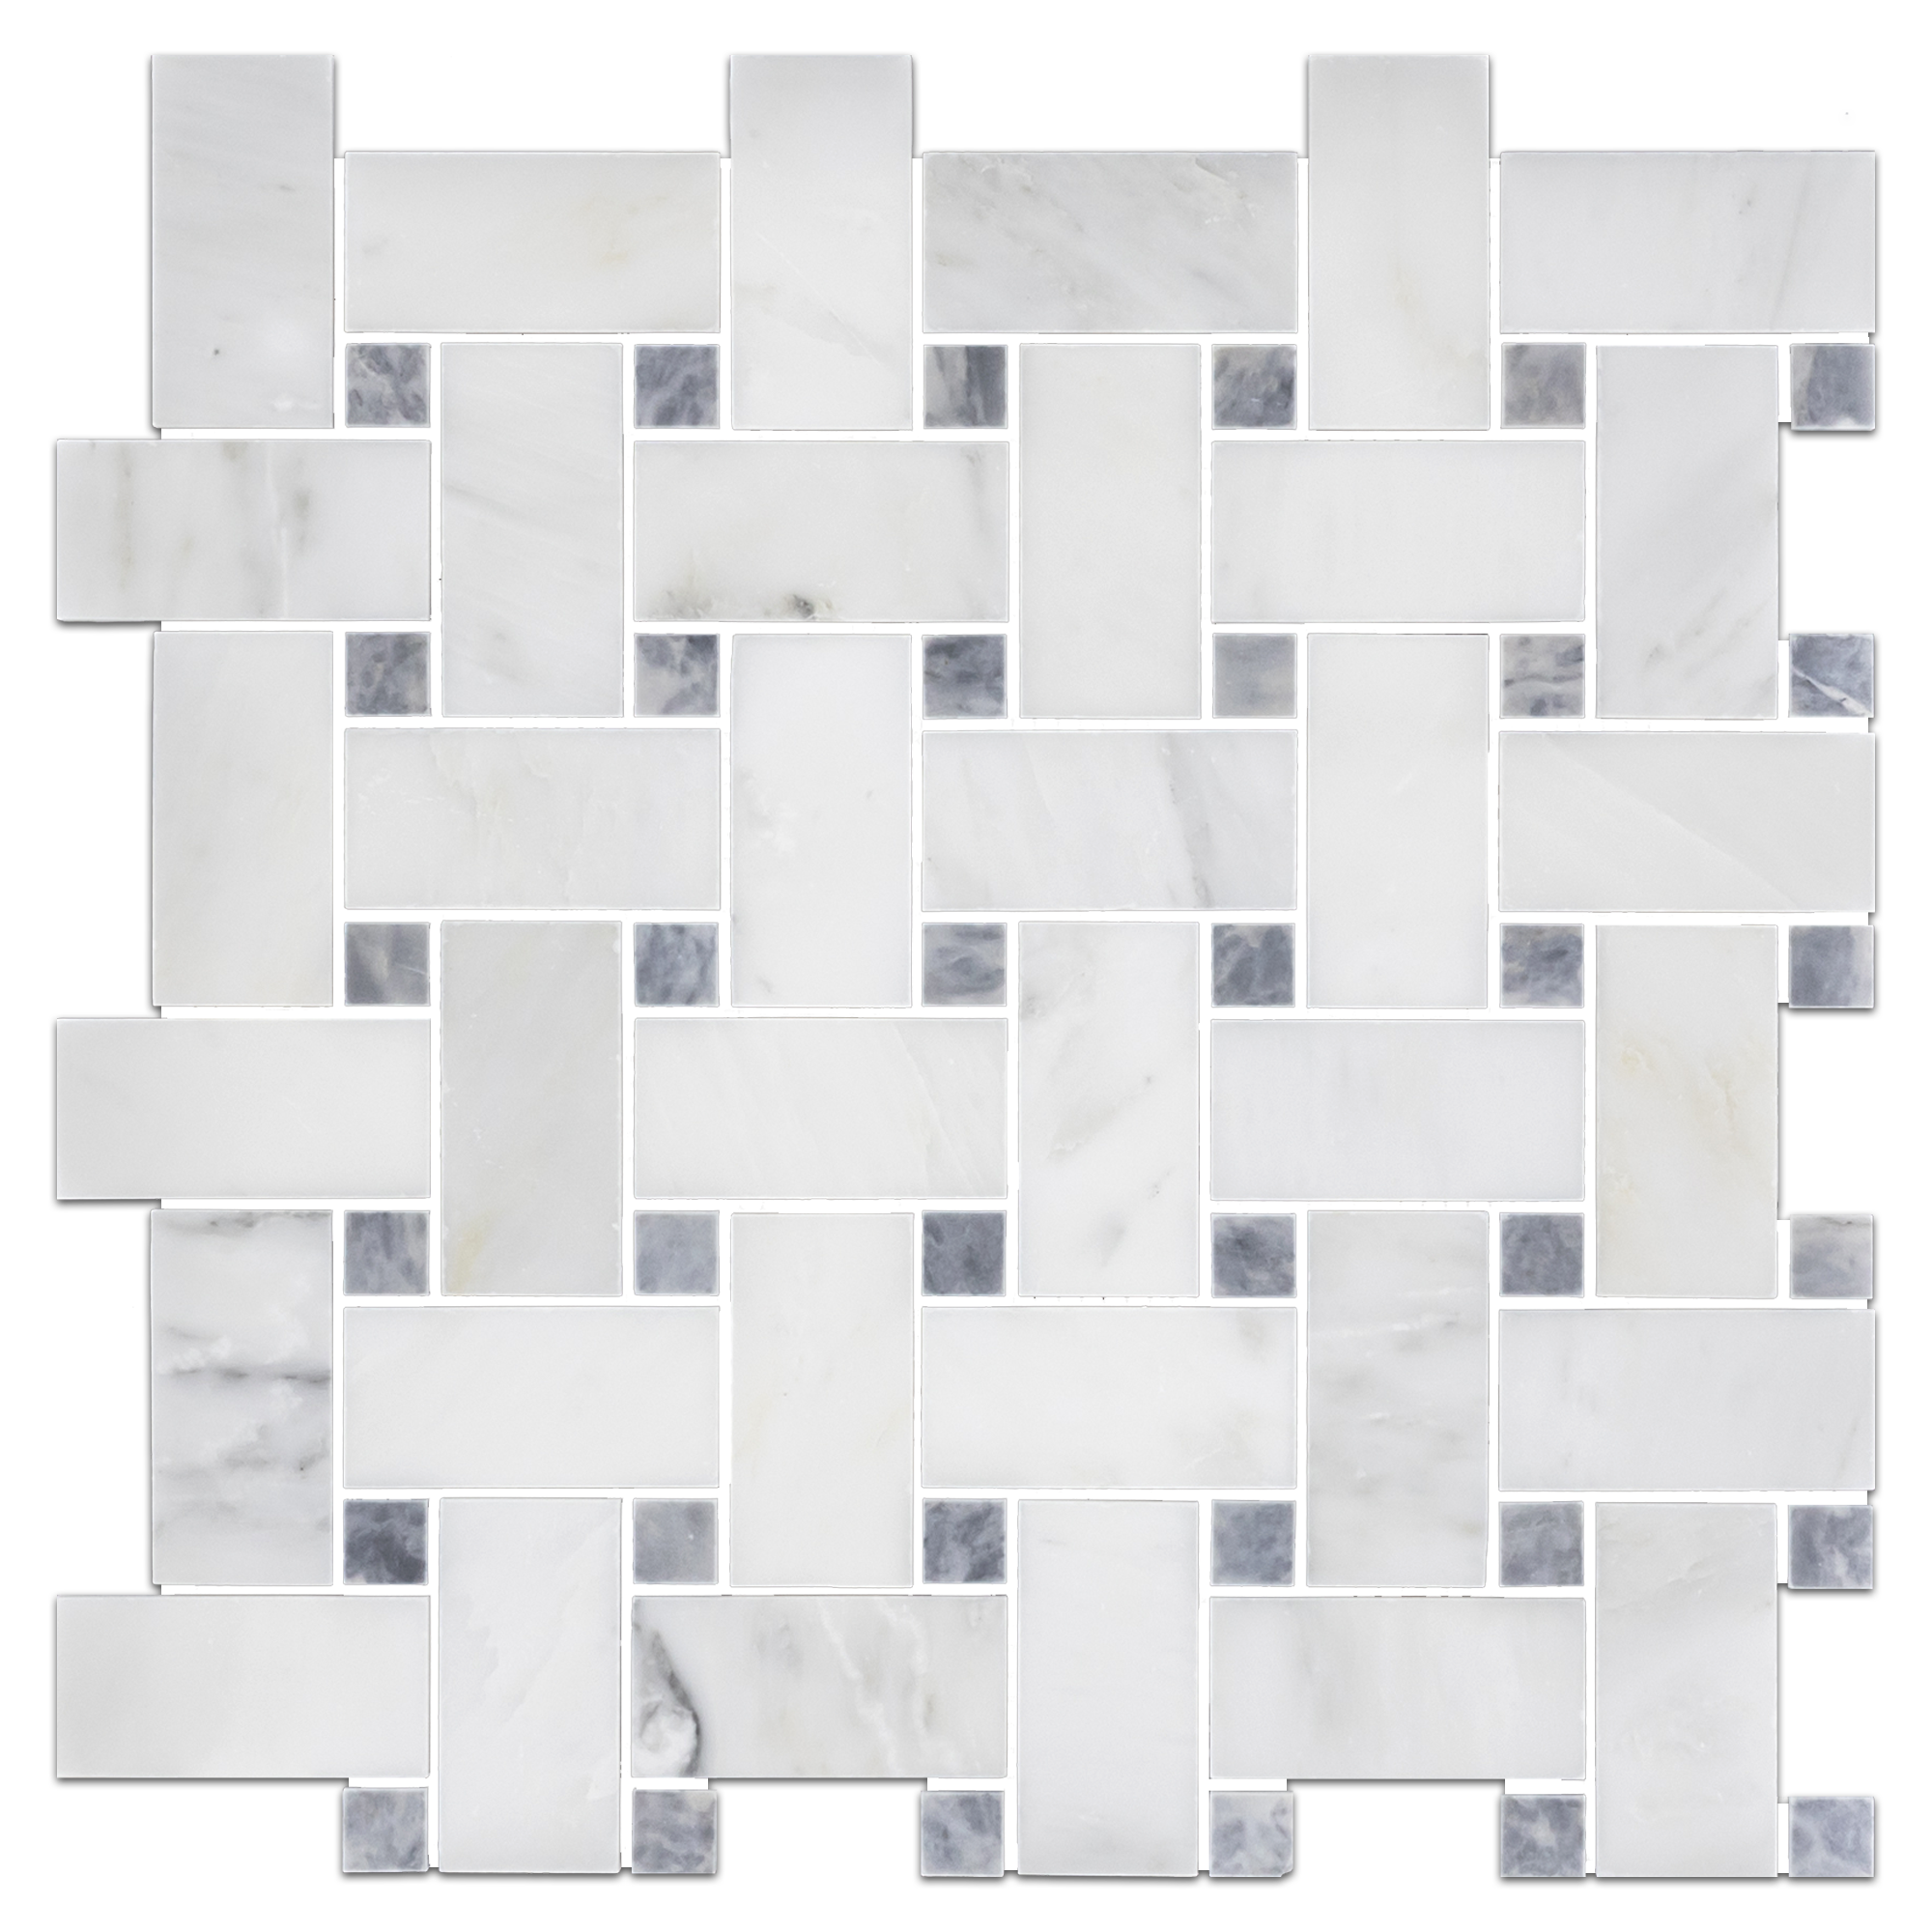 Elon Pearl White Pacific Gray Marble Stone Blend 5/8 Basketweave Field Mosaic 12x12x0.375 Honed AM8690H Surface Group International Product